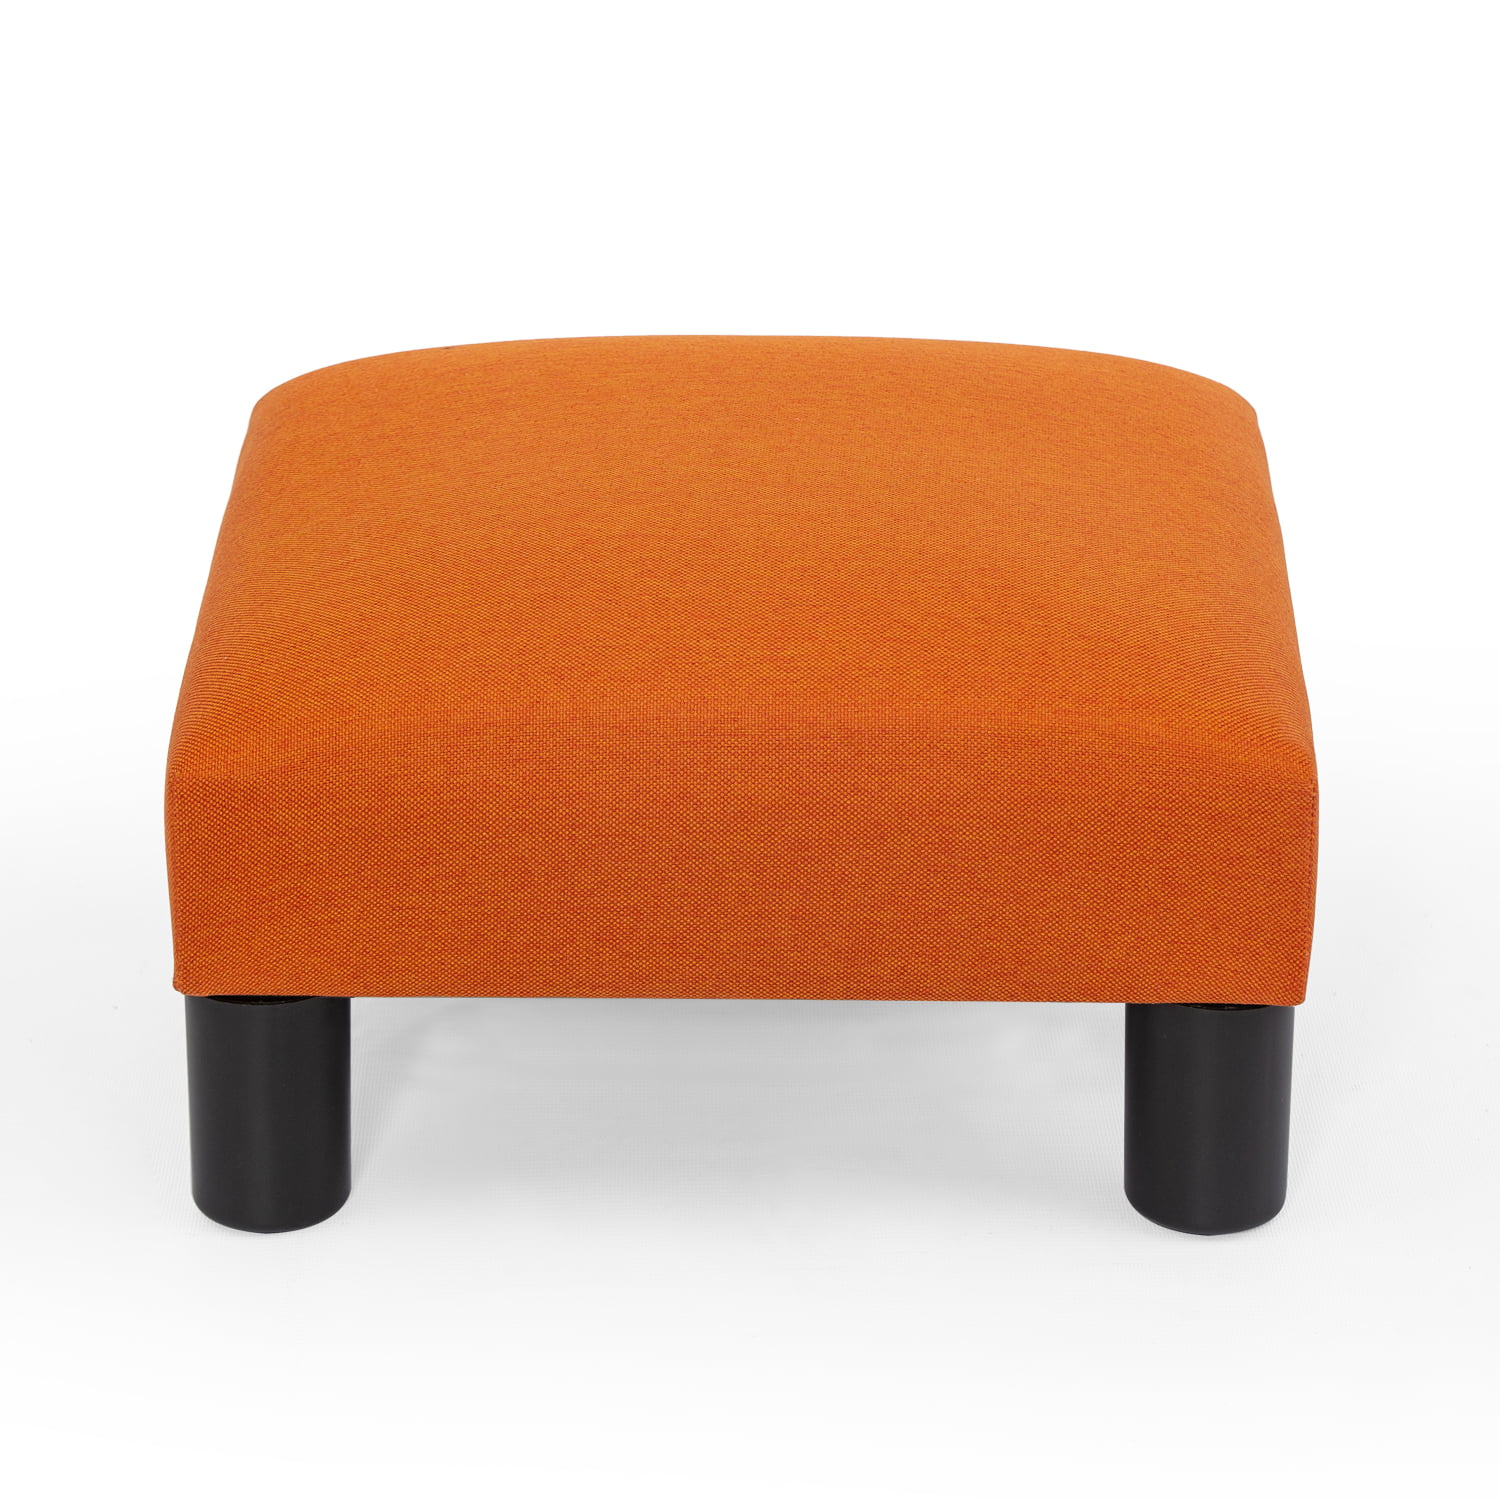 Joveco Small Footstool Ottoman, PU Leather Footrest Square Foot